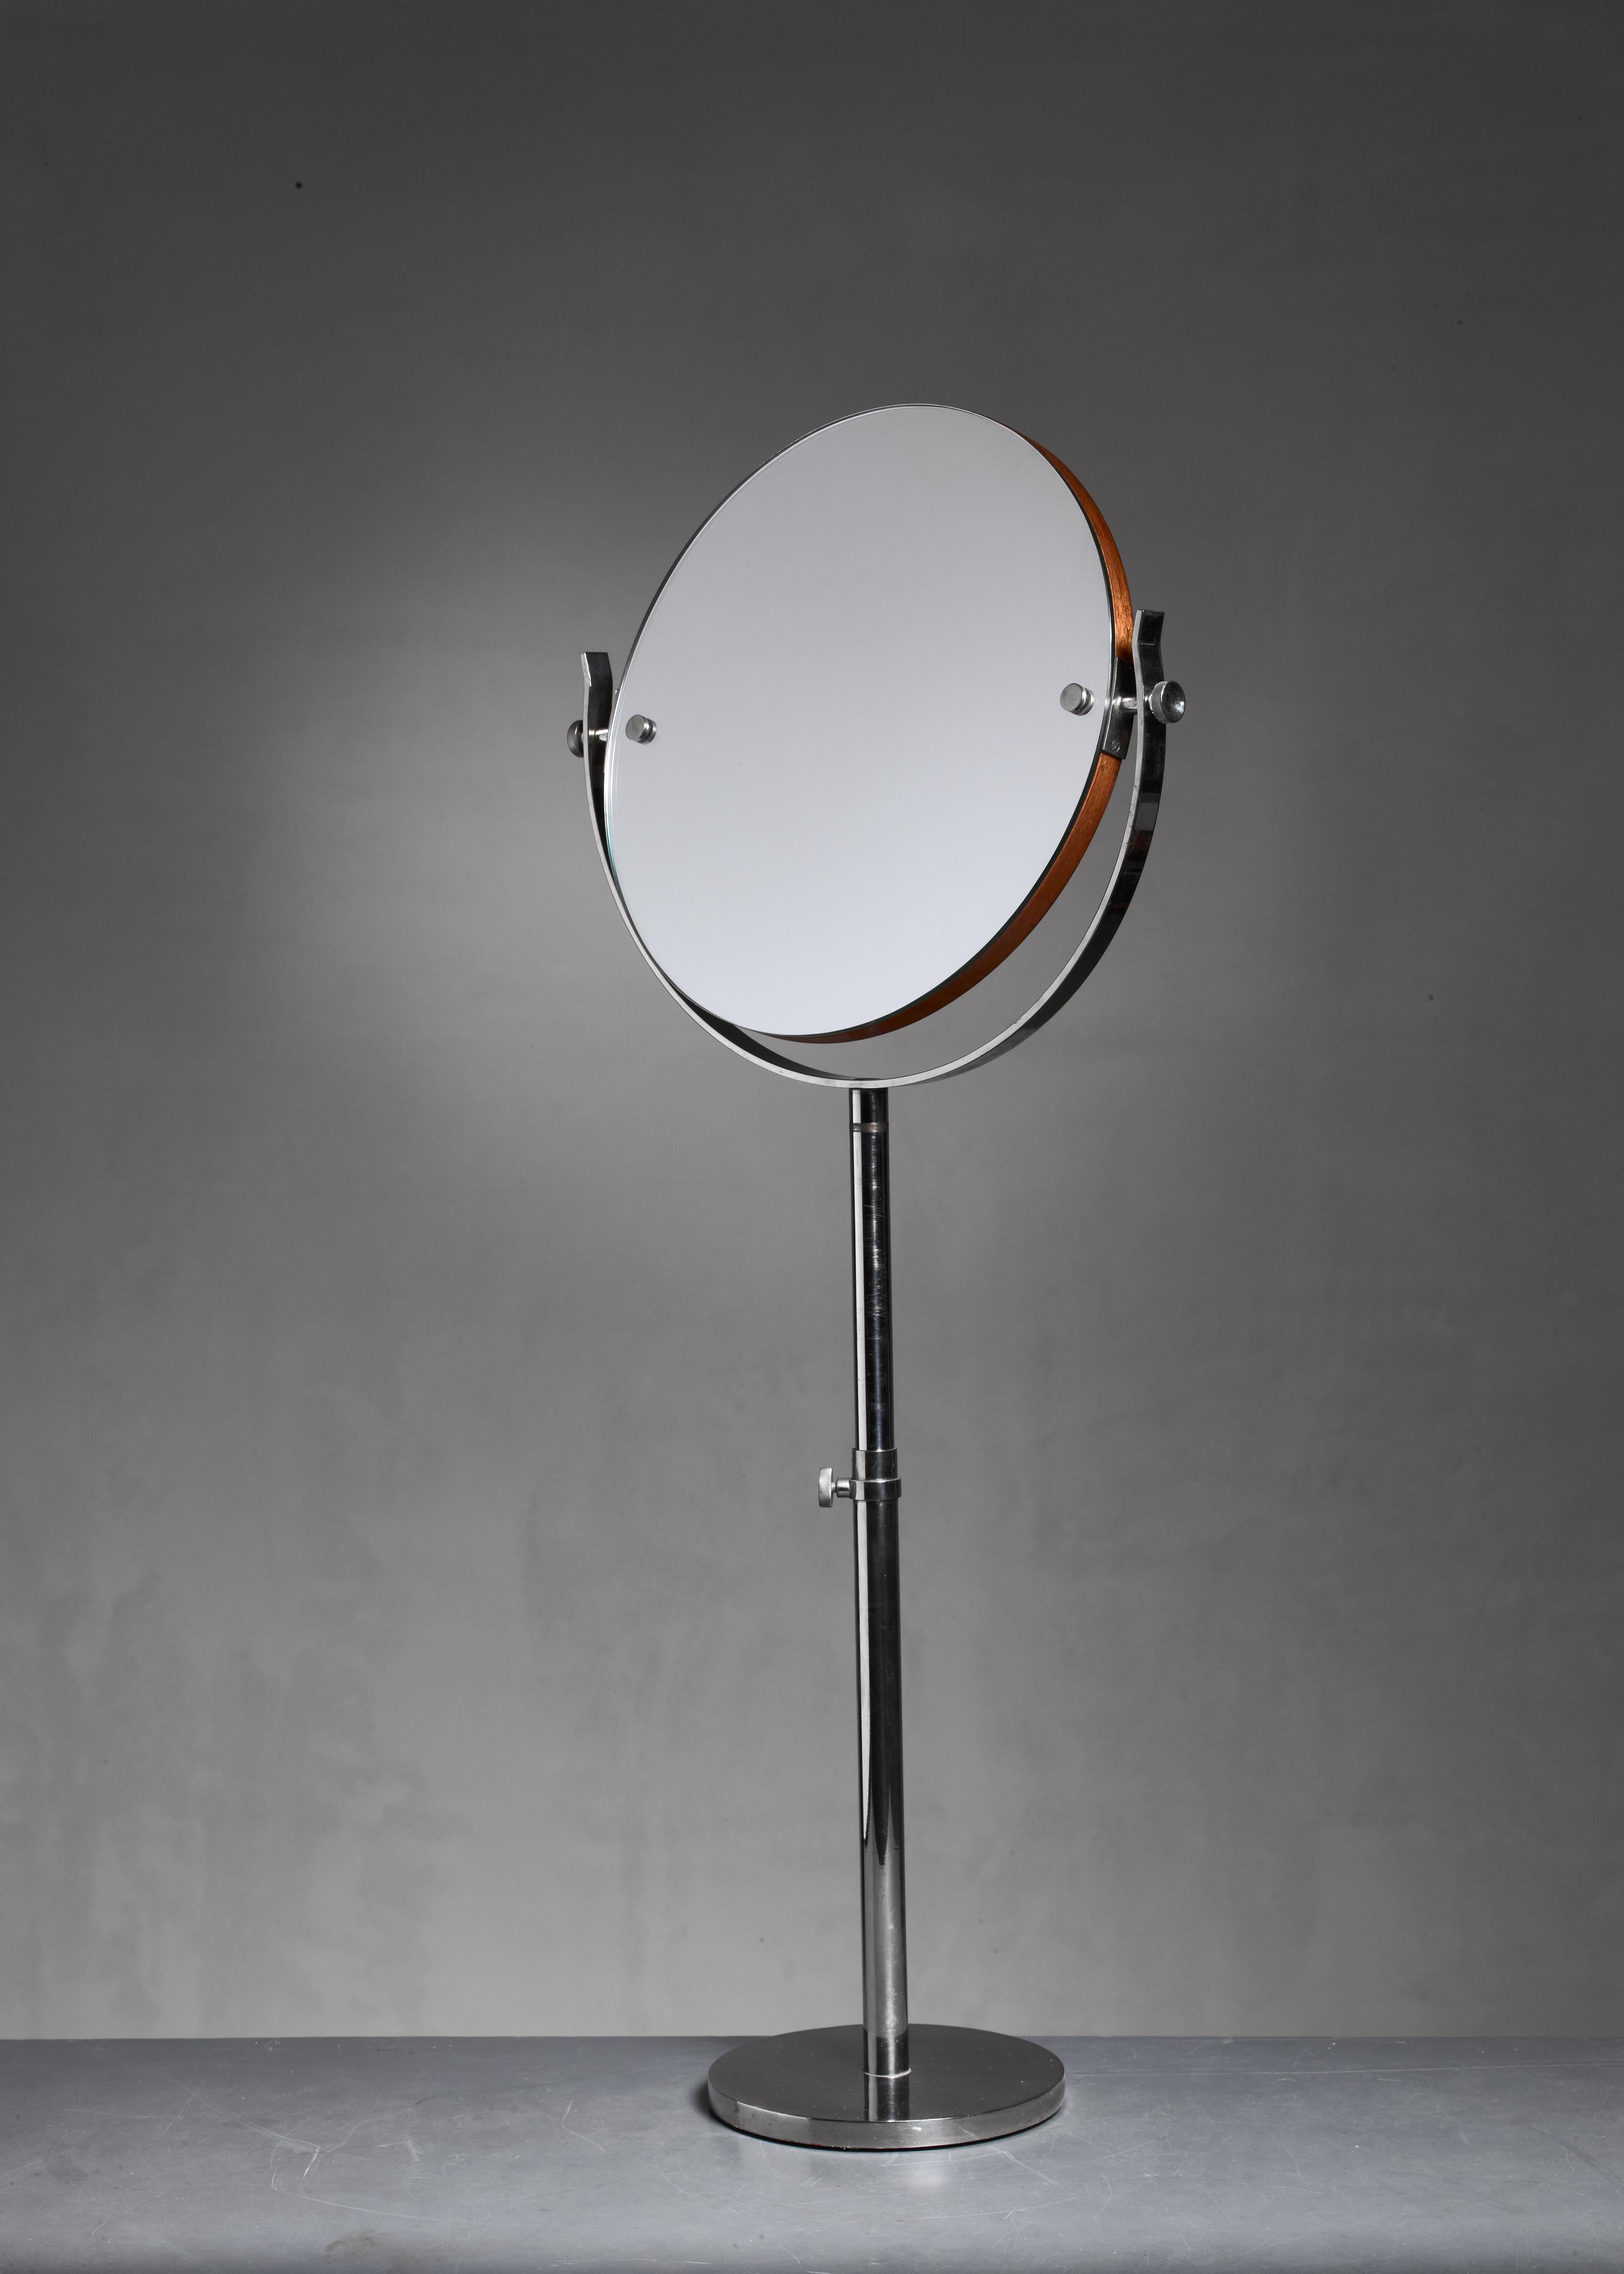 A large, height-adjustable (75-95 cm) vanity or shaving mirror made of nickel and wood. The diameter of the mirror itself is 36 cm (14